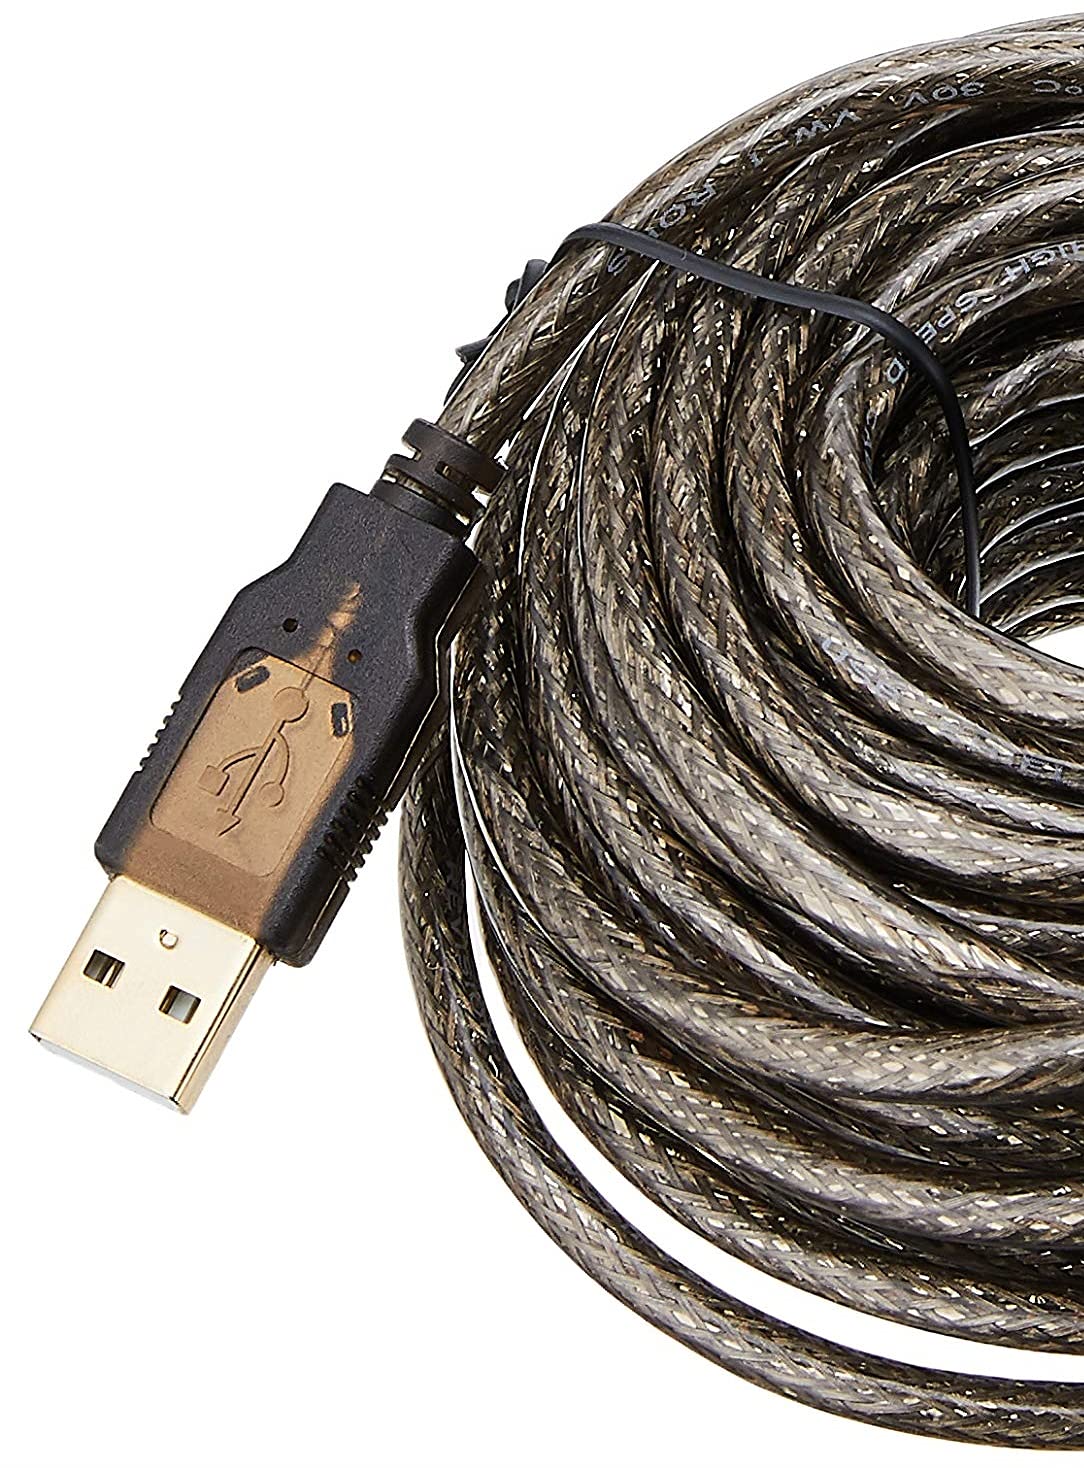 Tripp Lite USB 2.0 Hi-Speed Active Extension Repeater Cable (A M/F) 10 Meter (33-ft.) (U026-10M)